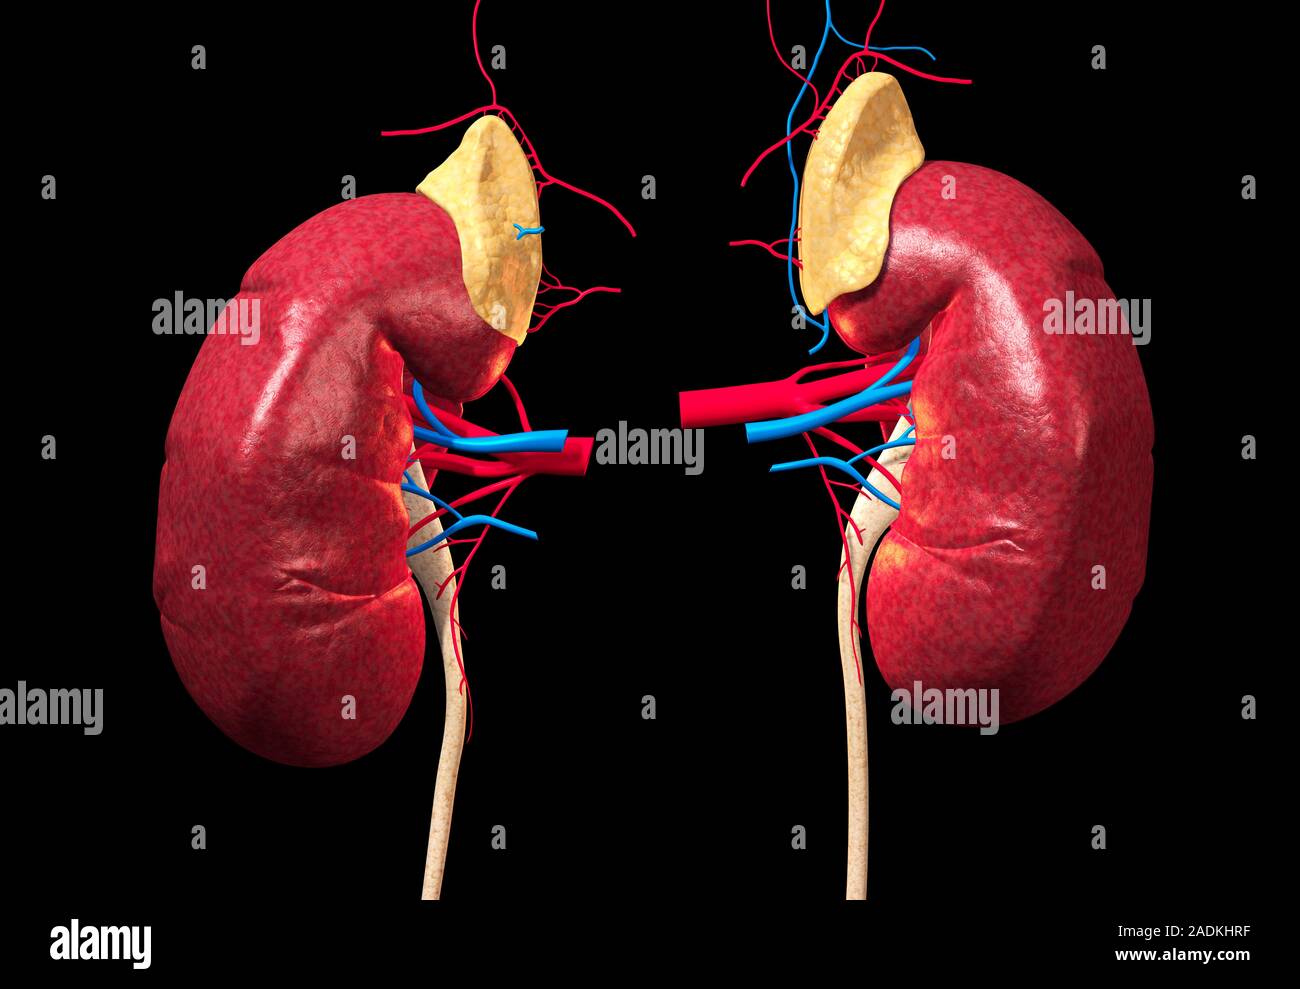 Kidneys Computer Artwork Of The Human Renal System The Kidneys Brown